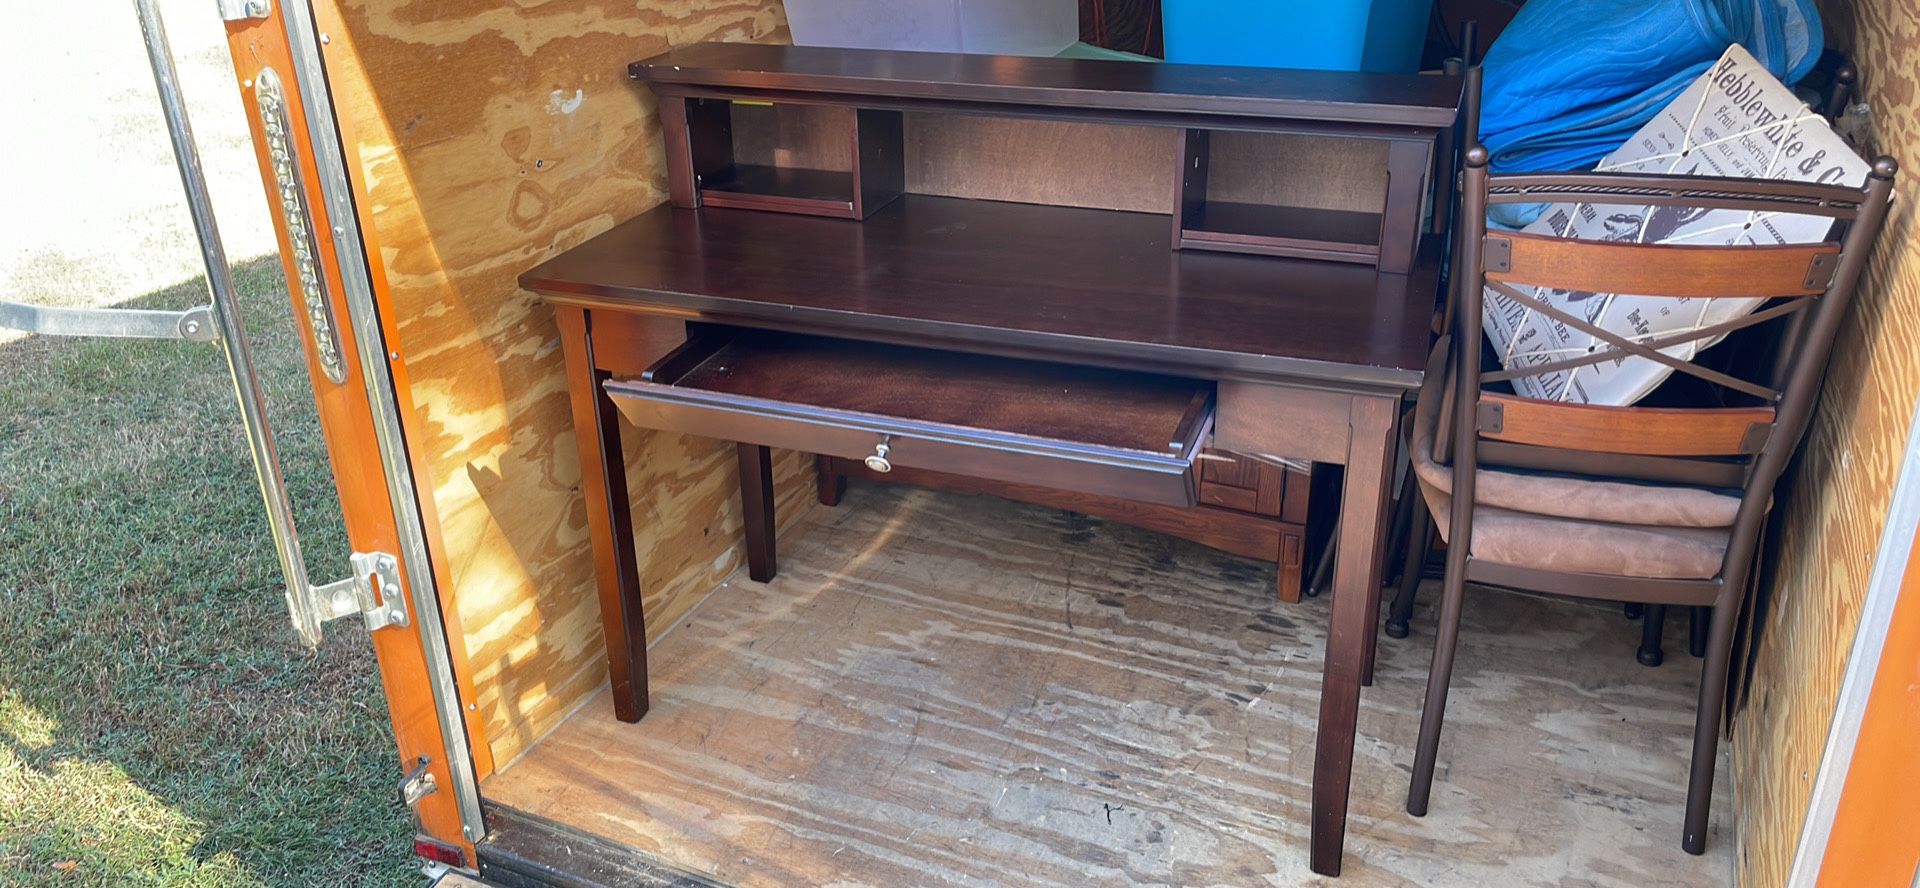 Secretary / Computer Desk With Pull Out Keyboard Drawer